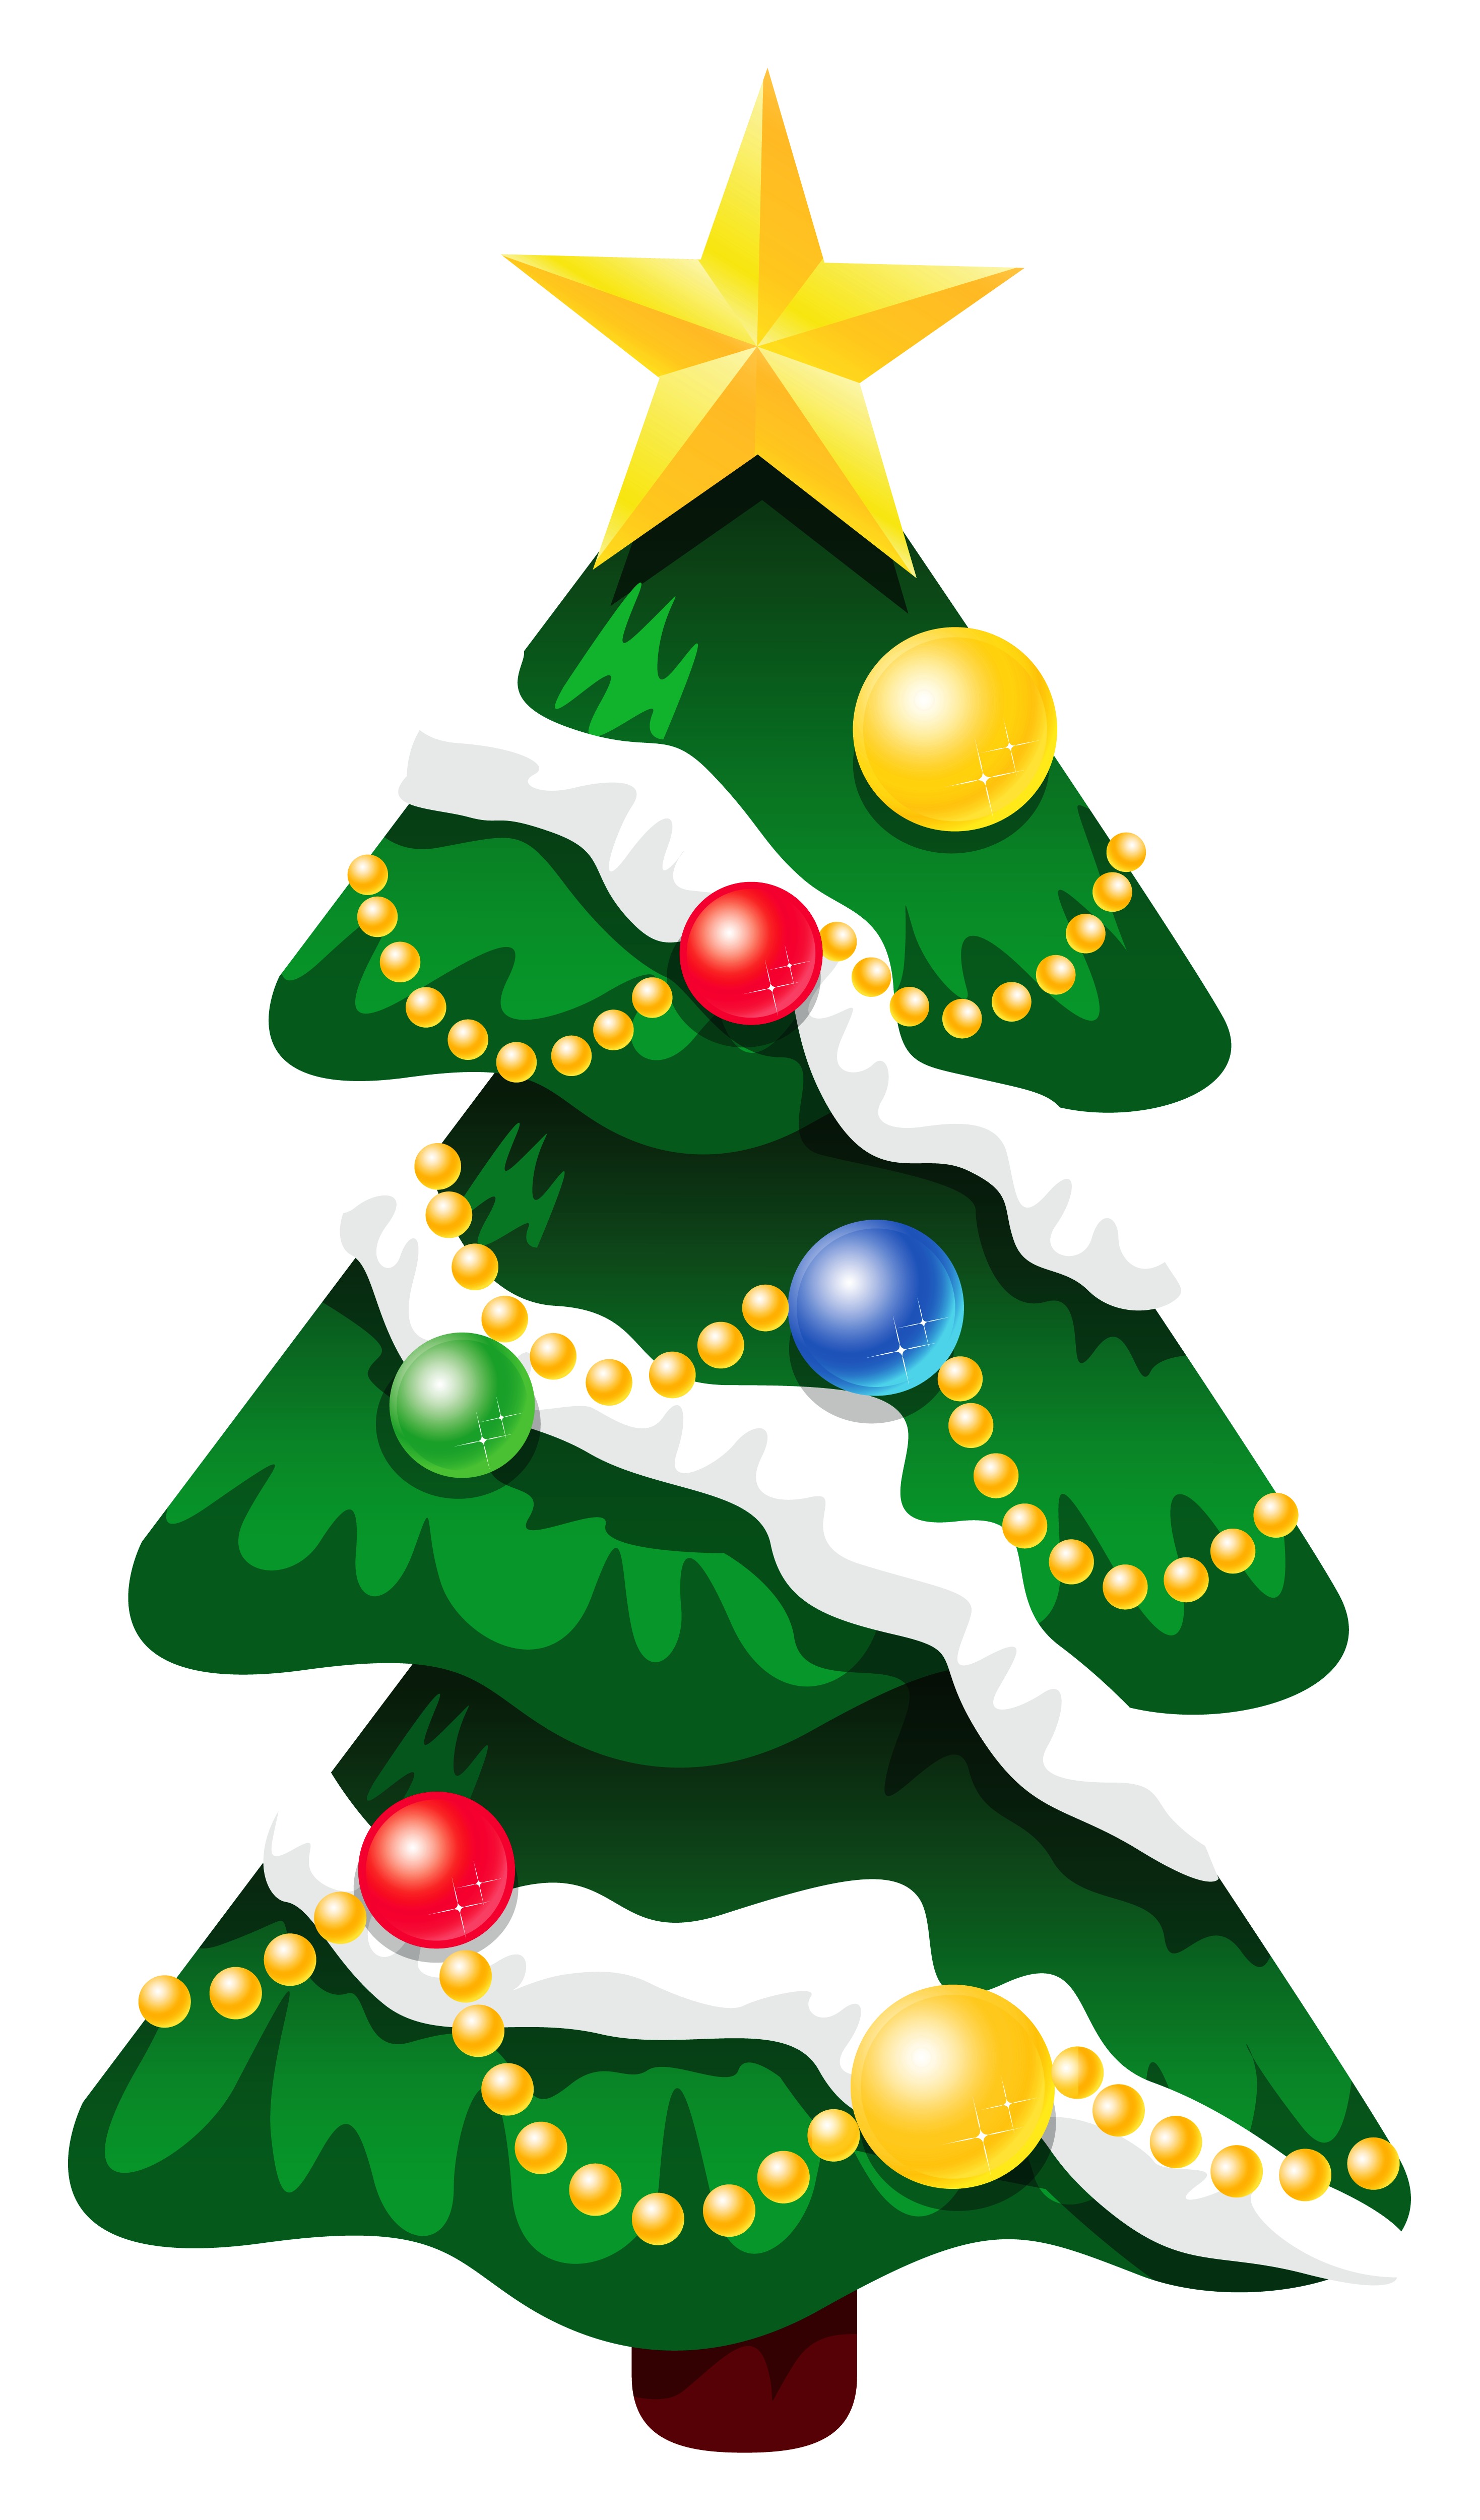 Download Transparent Snowy Deco Xmas Tree With Star Png Clipart ...